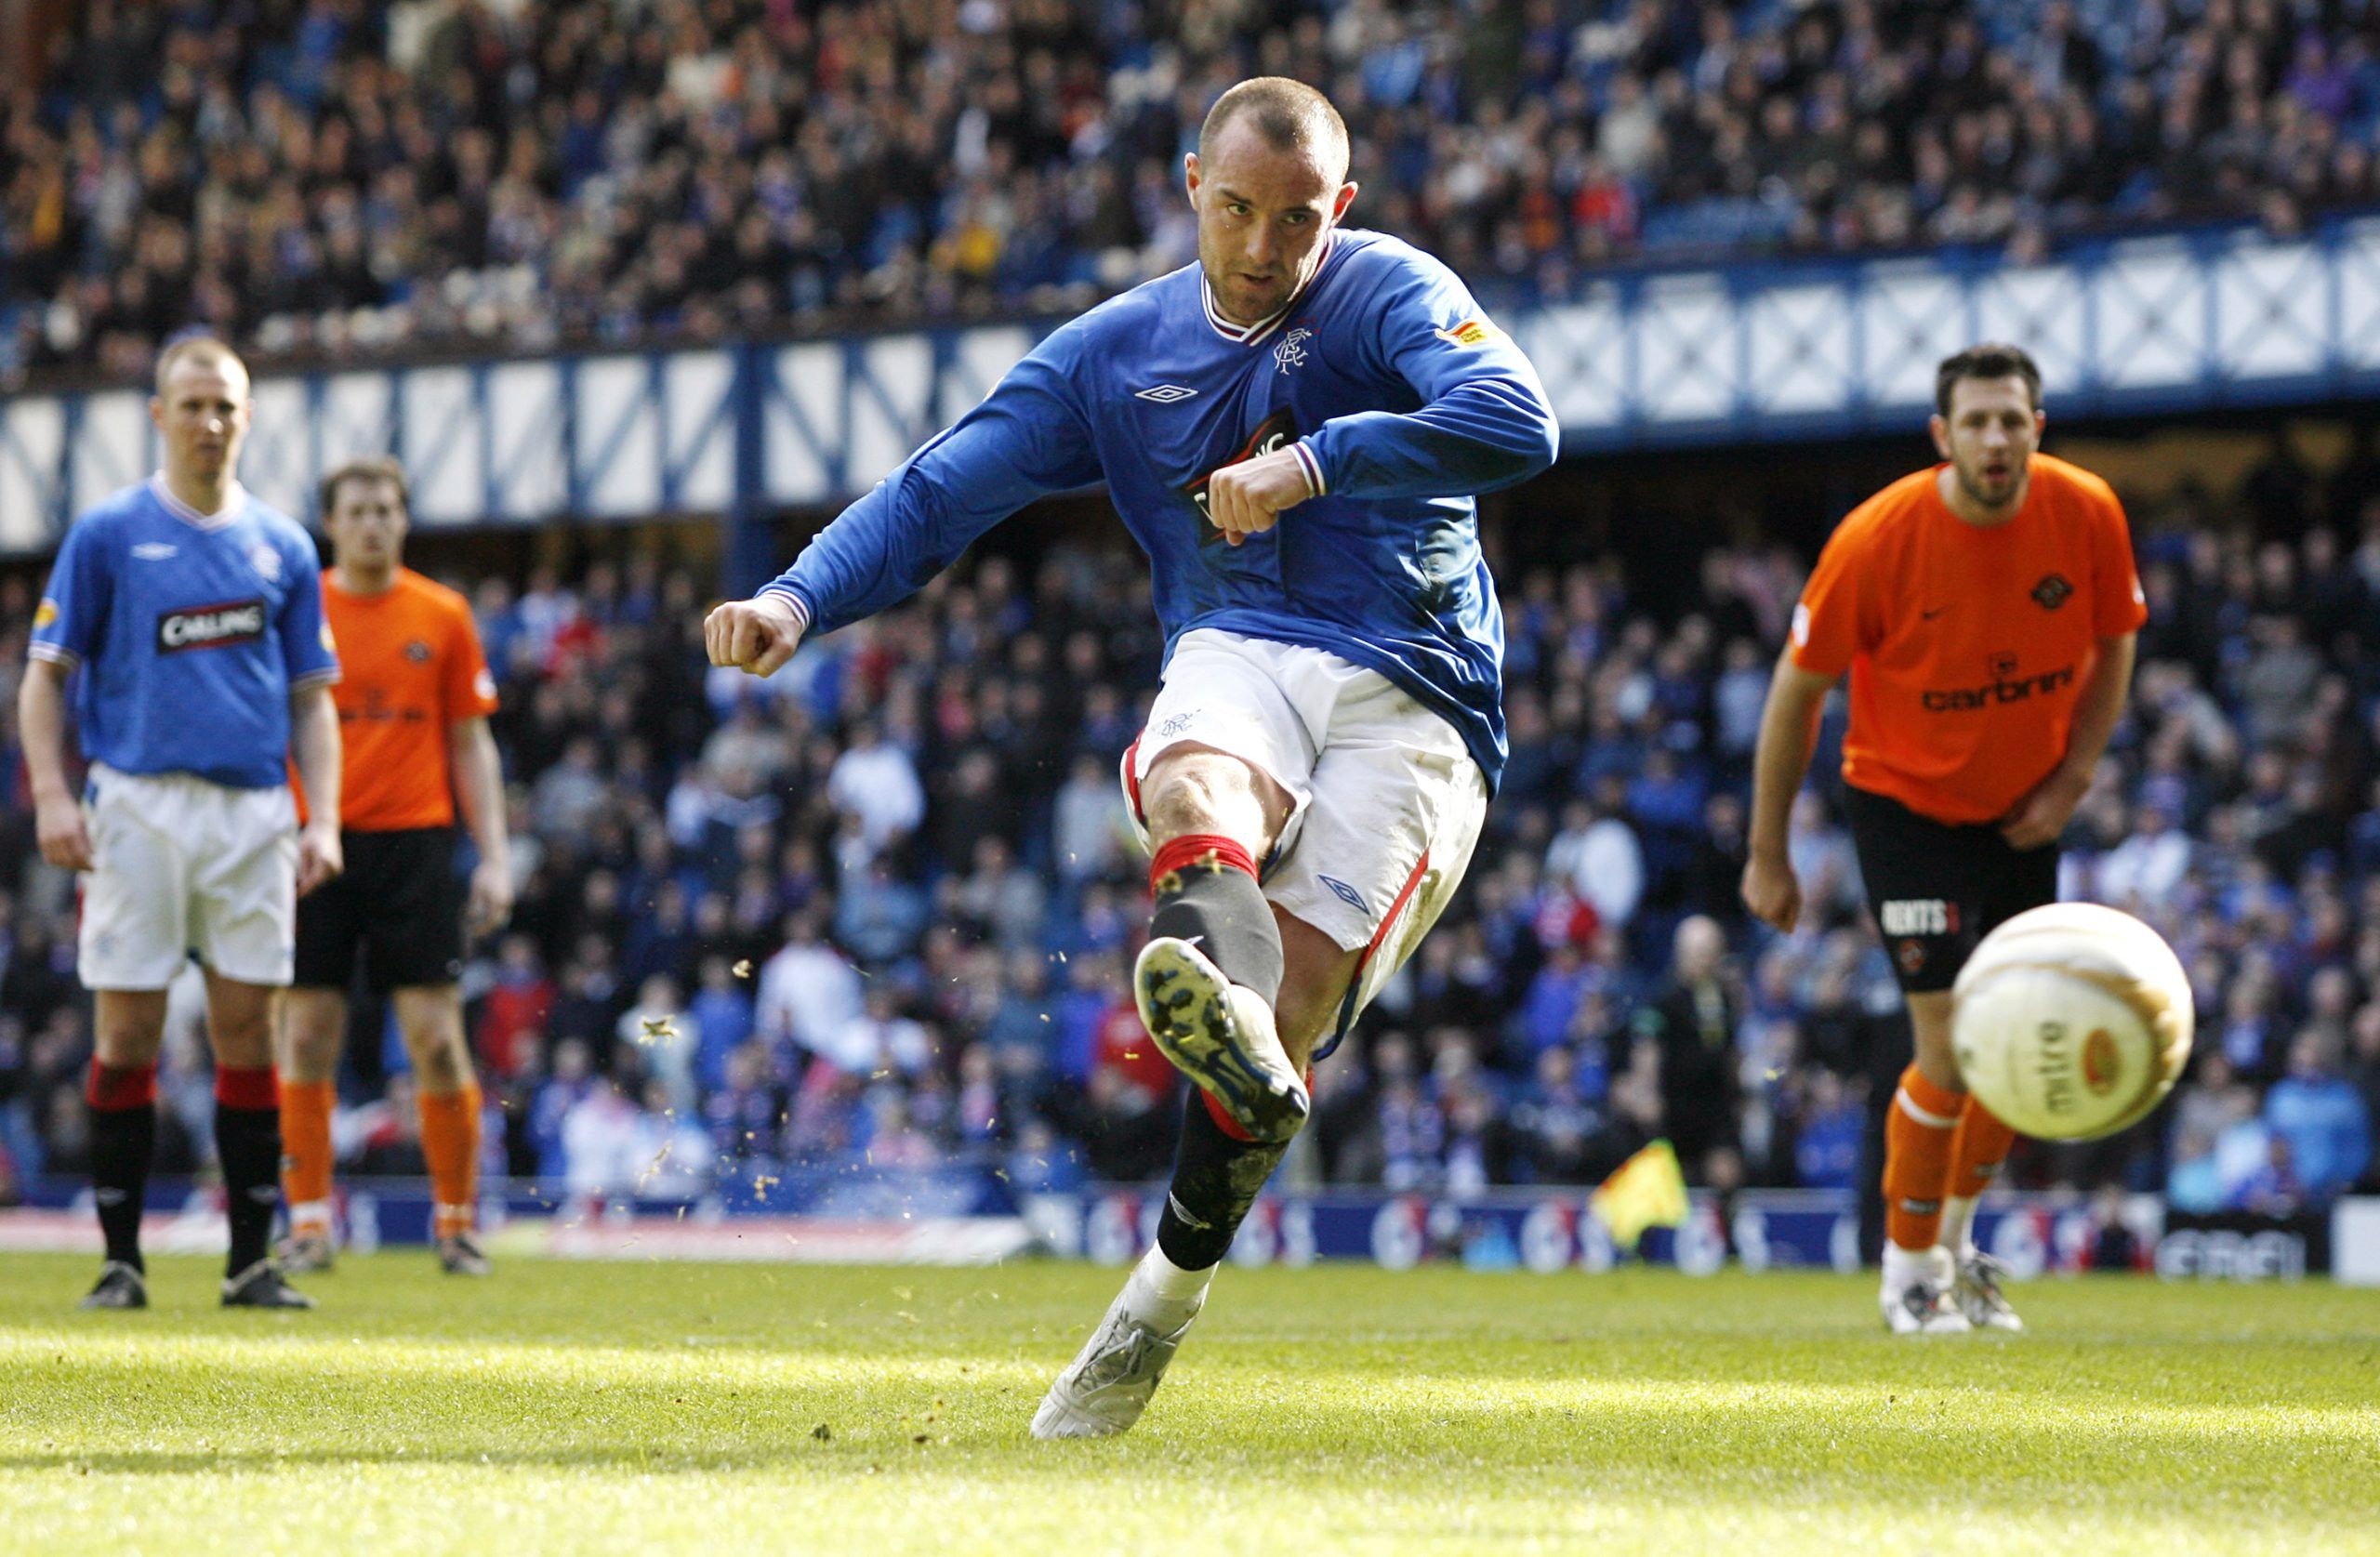 Football - Rangers v Dundee United Active Nation Scottish Cup Quarter Final - Ibrox Stadium - 09/10 - 14/3/10 
Kris Boyd of Rangers scores their second goal from the penalty spot 
Mandatory Credit: Action Images / Ed Sykes 
Livepic